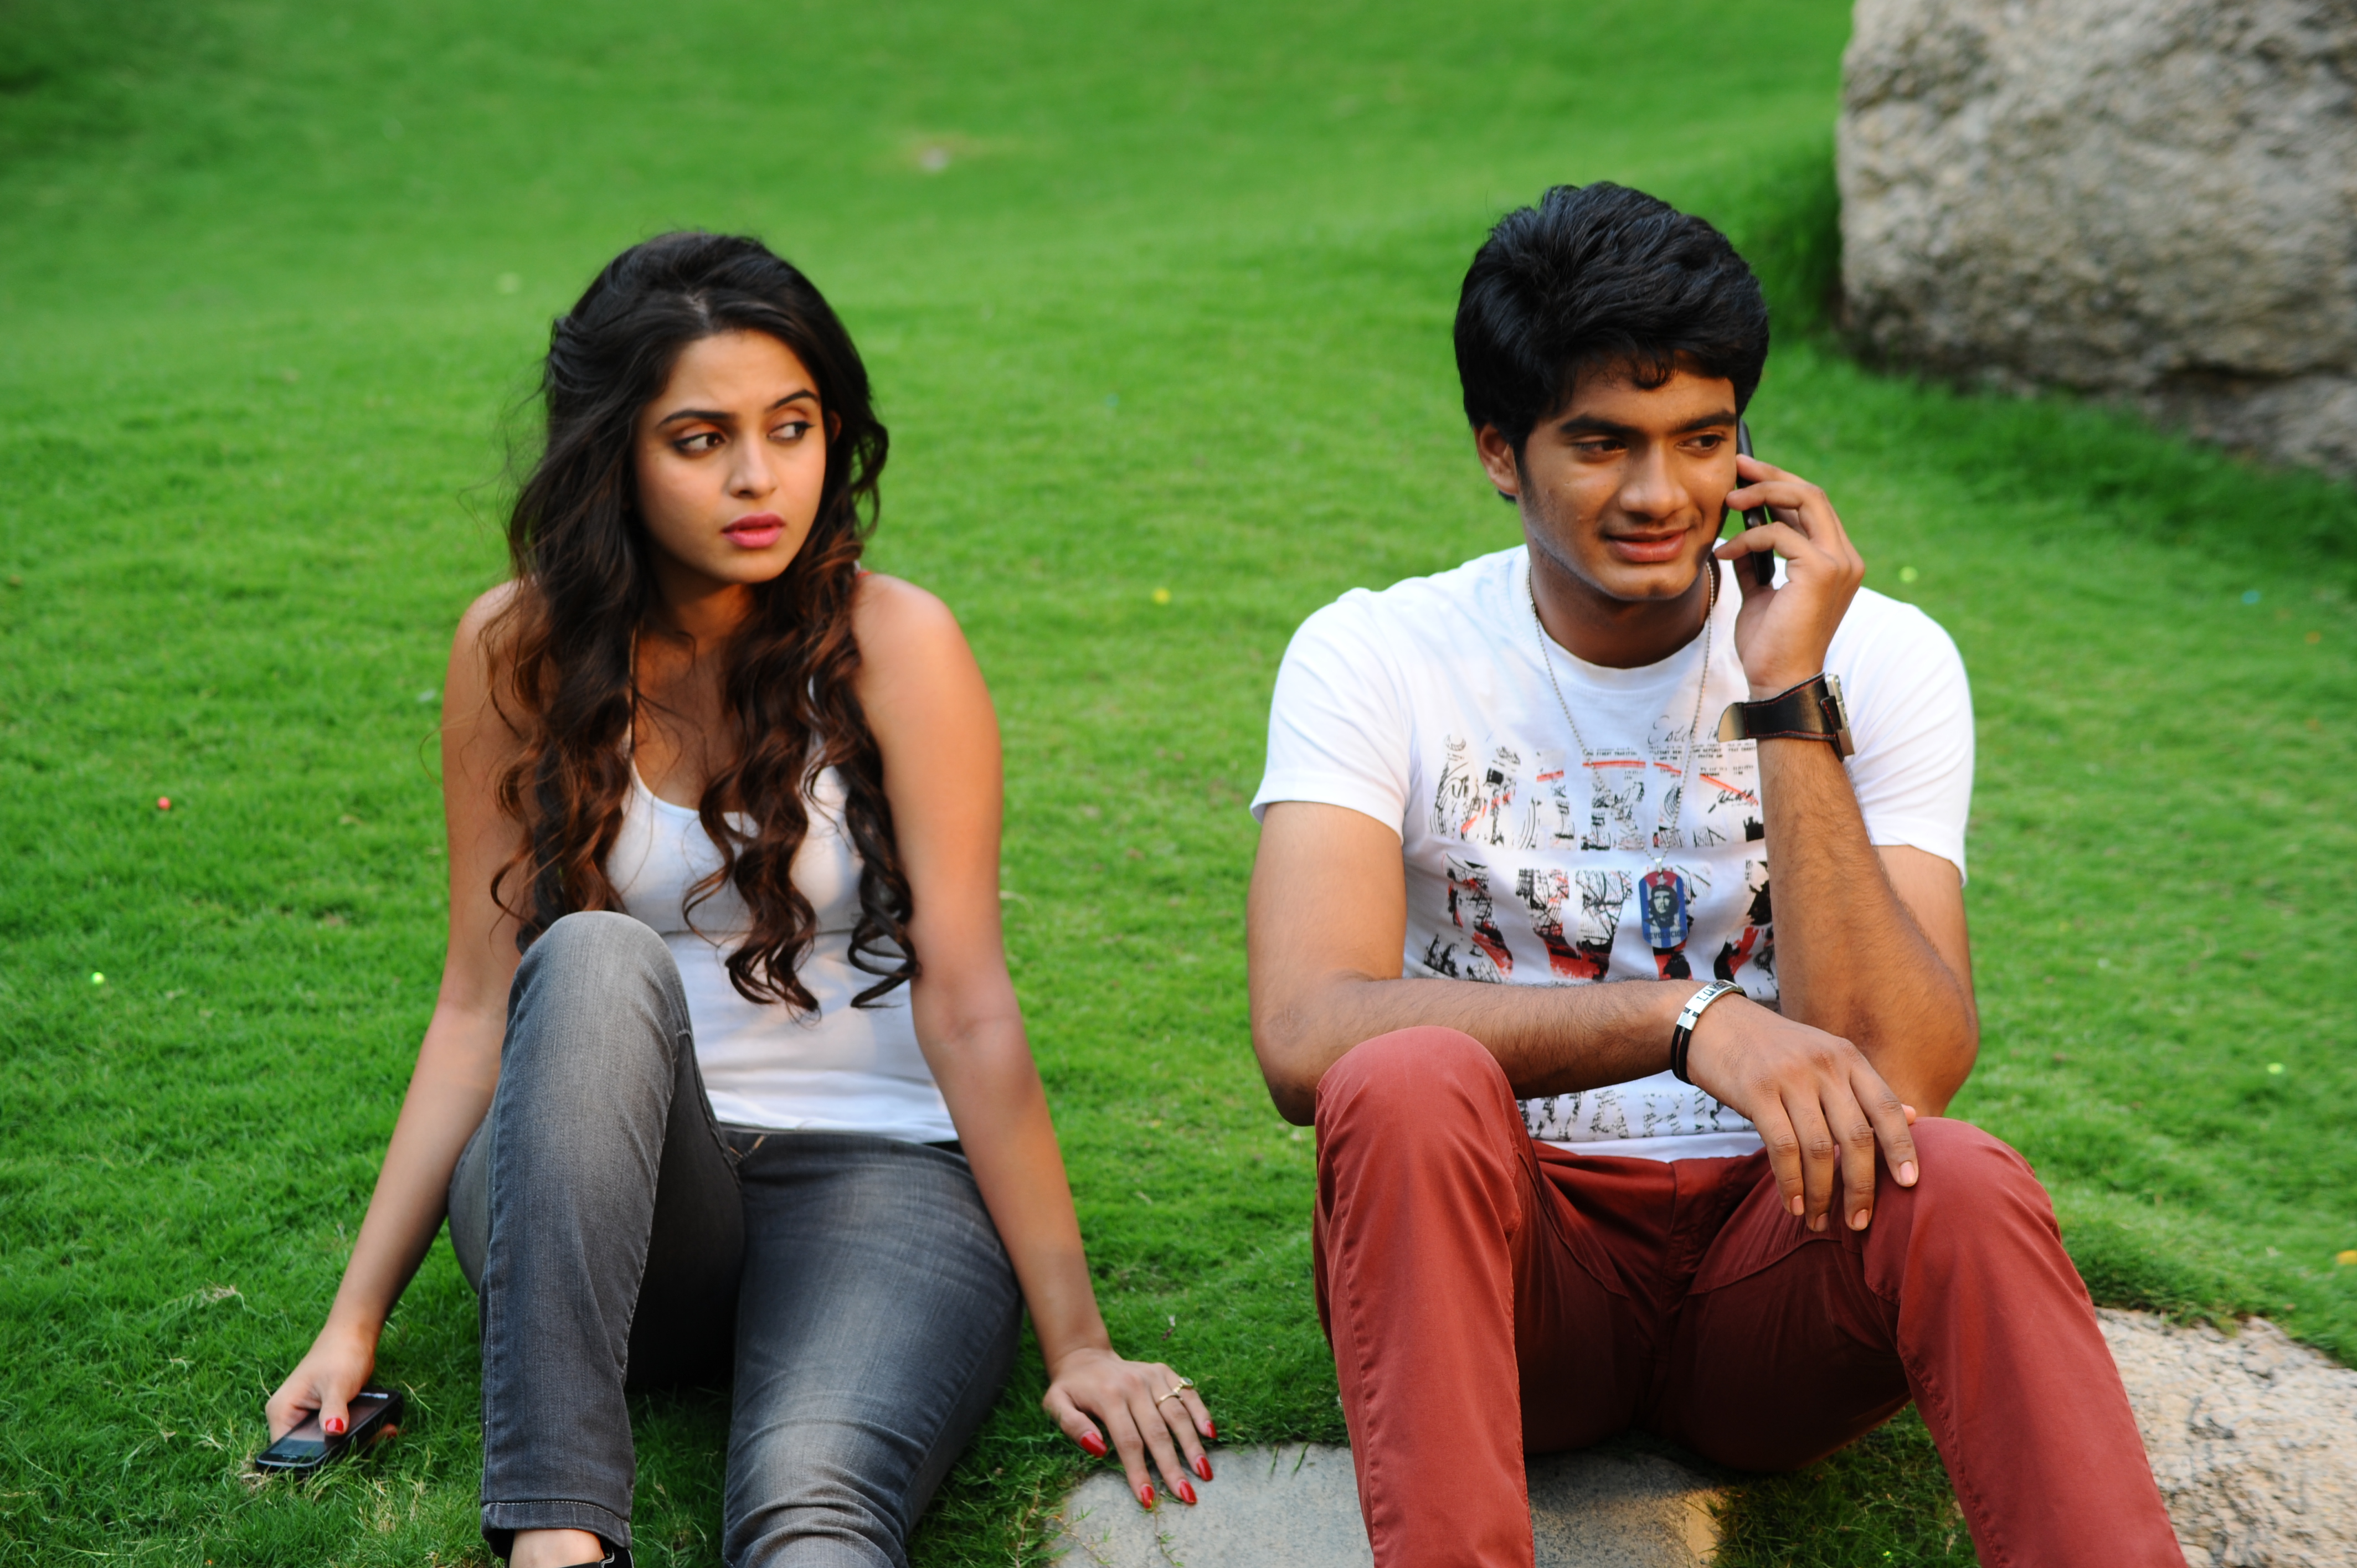 Nuvve naa bangaram movie stills 2- Photos,Spicy Hot Pics,Images,High Resolution WallPapers Download